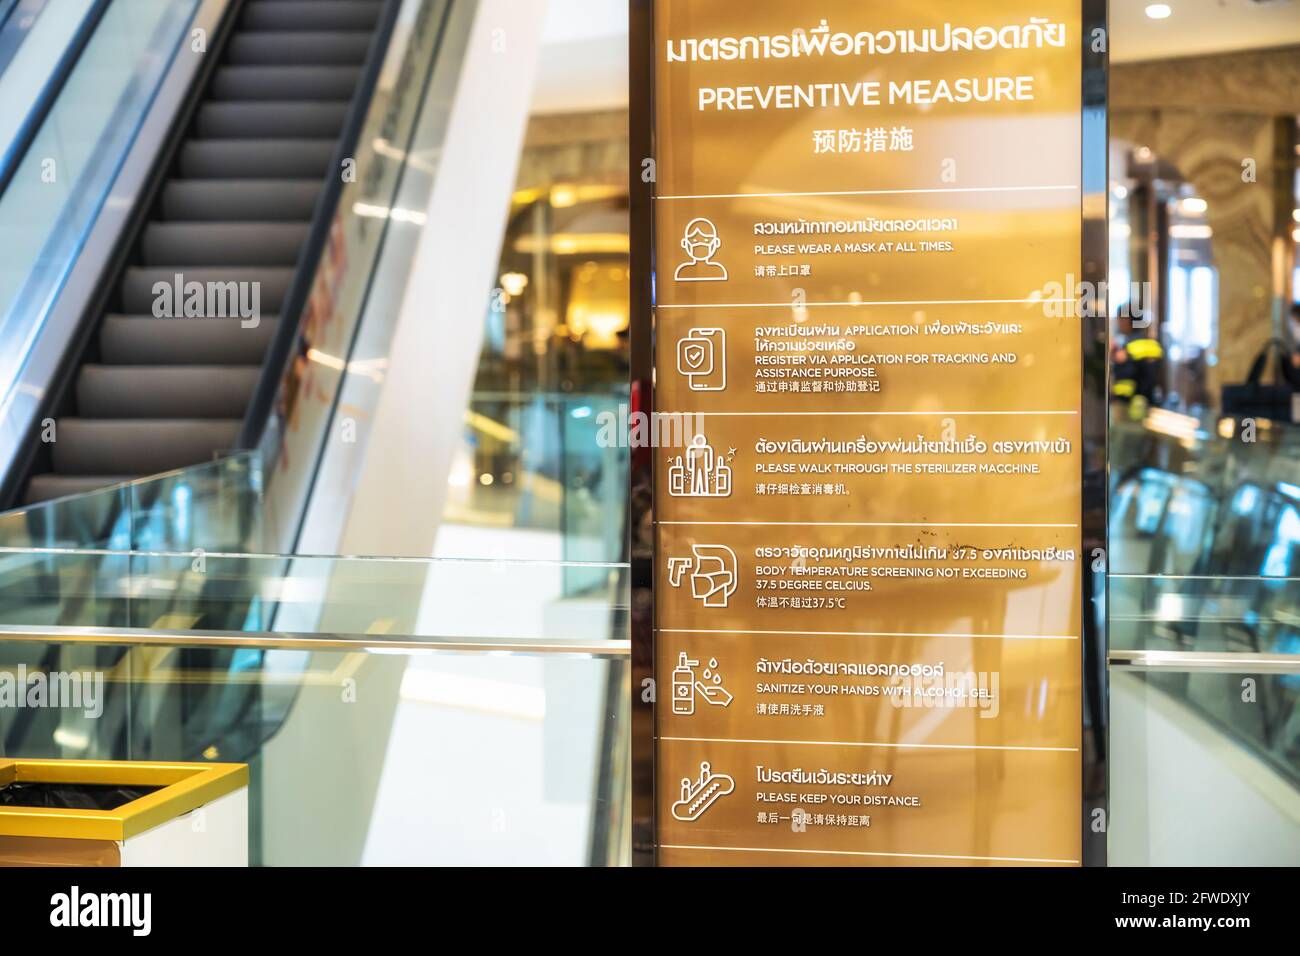 Covid-19 pandemic, new normal Concept, Preventive Measure Text with Thai and Chinese Language on the Billboard before escalator in department store Stock Photo